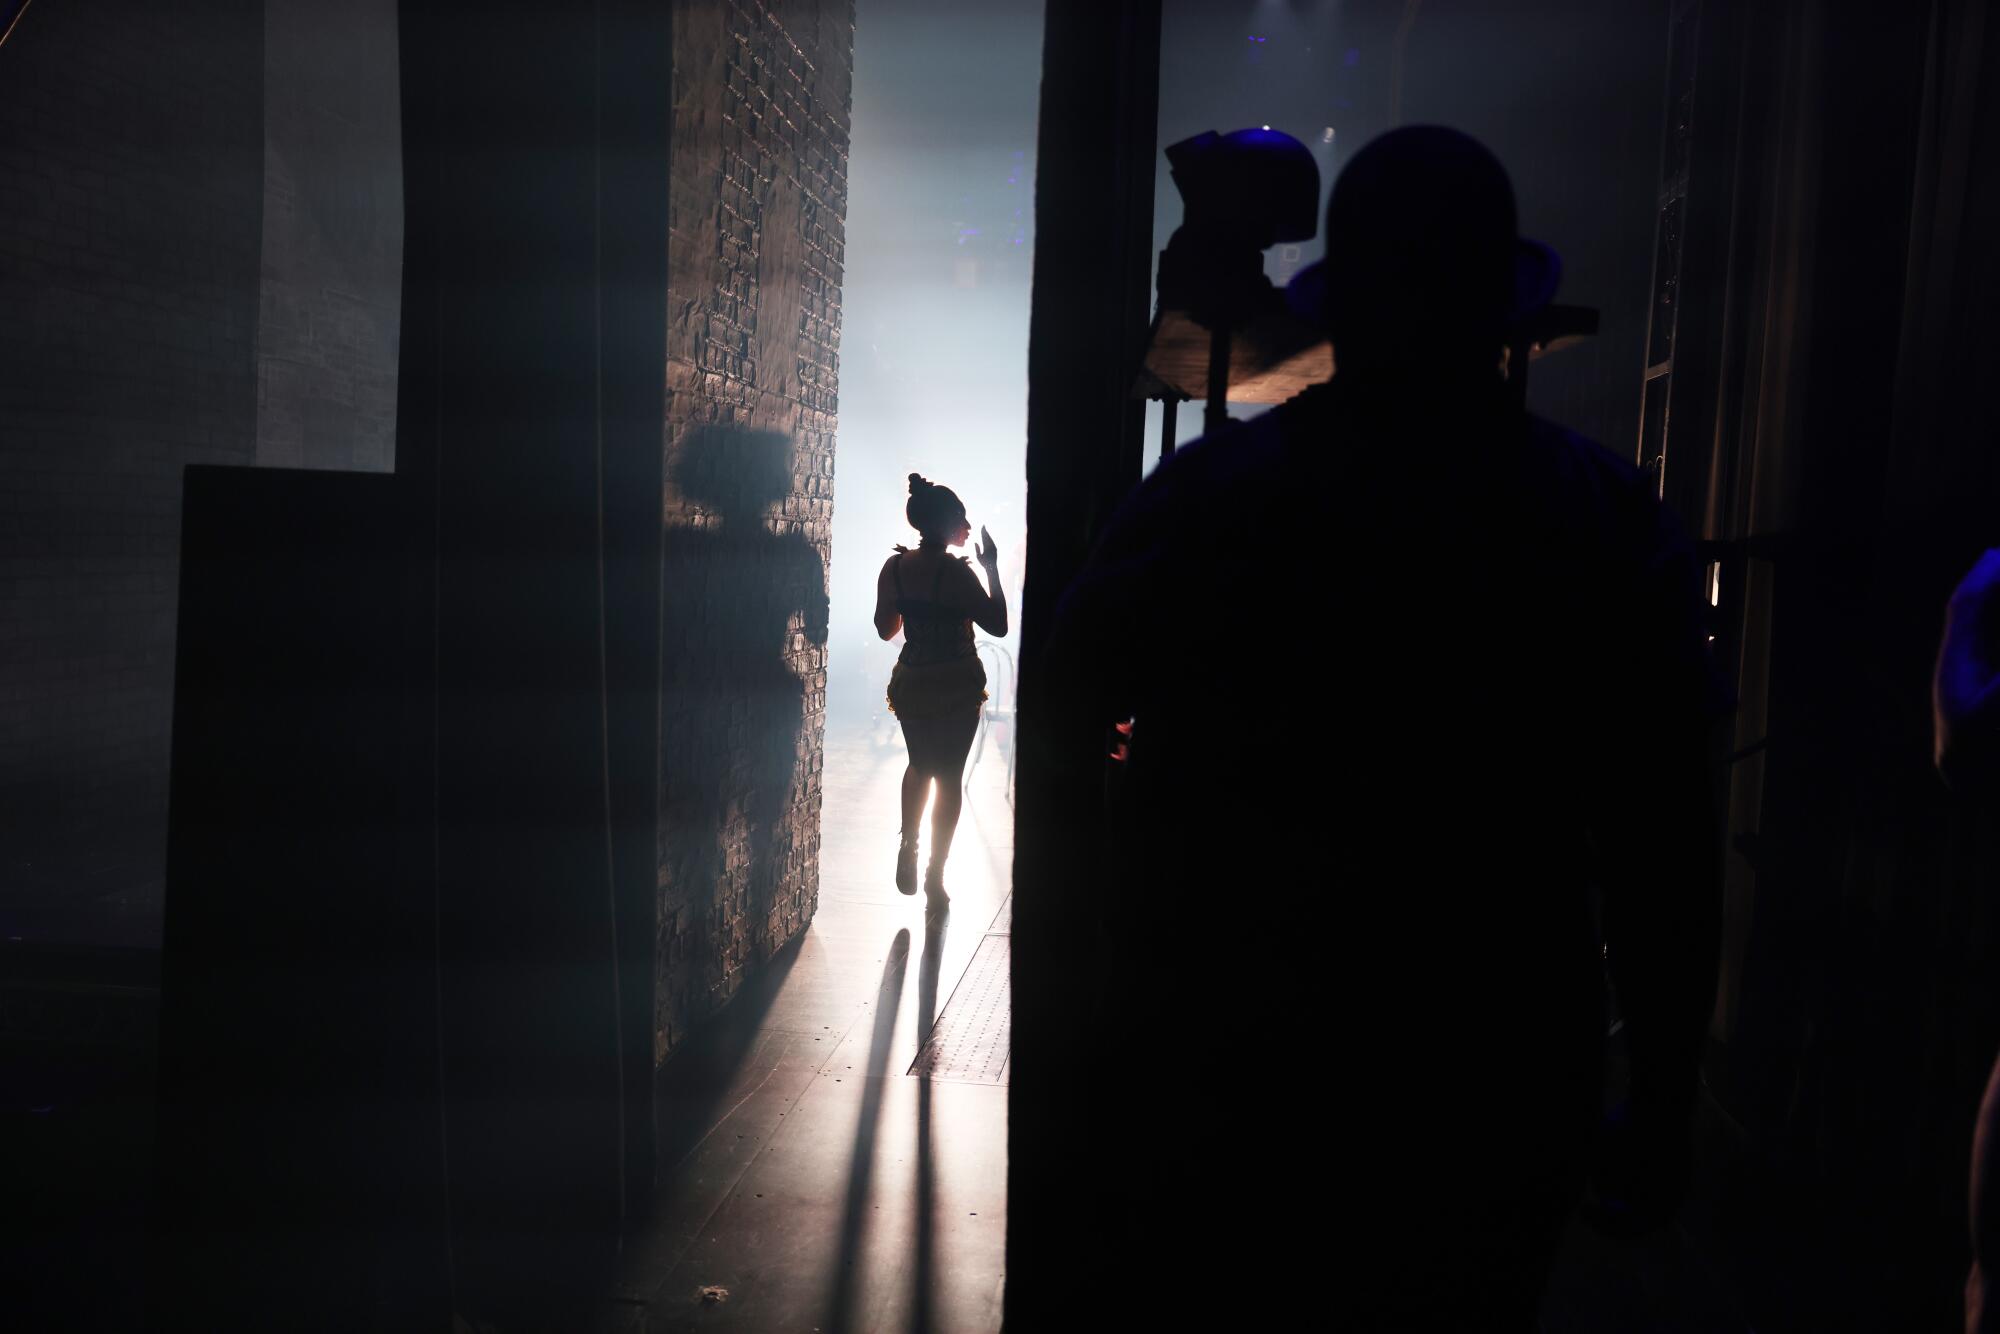 An actors walks on stage to perform during the musical adaptation of "Moulin Rouge!" at Pantages Theater.